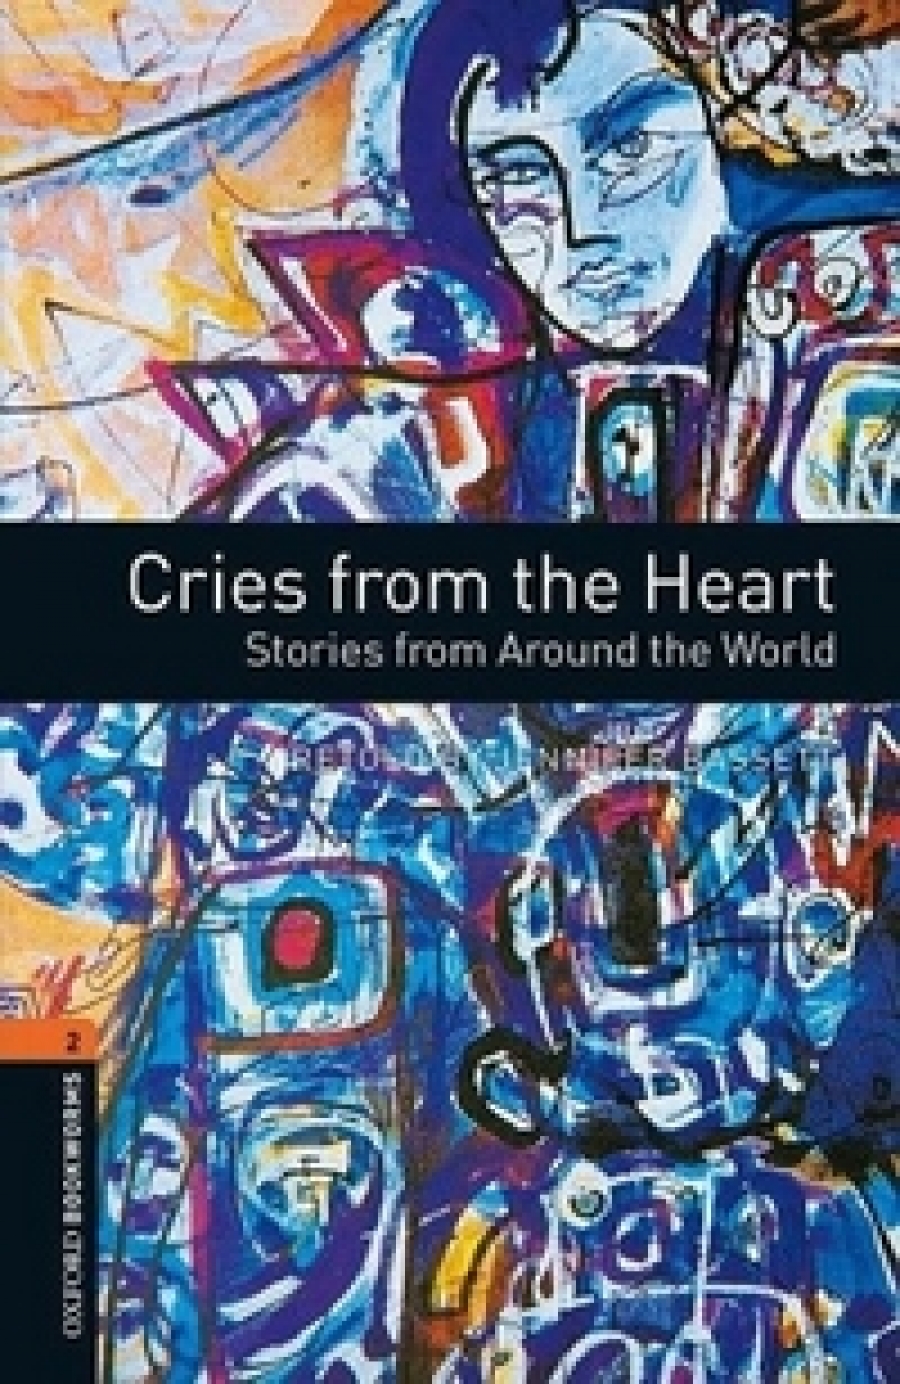 Retold by Jenifer Bassett Cries from the Heart: Stories from Around the World 